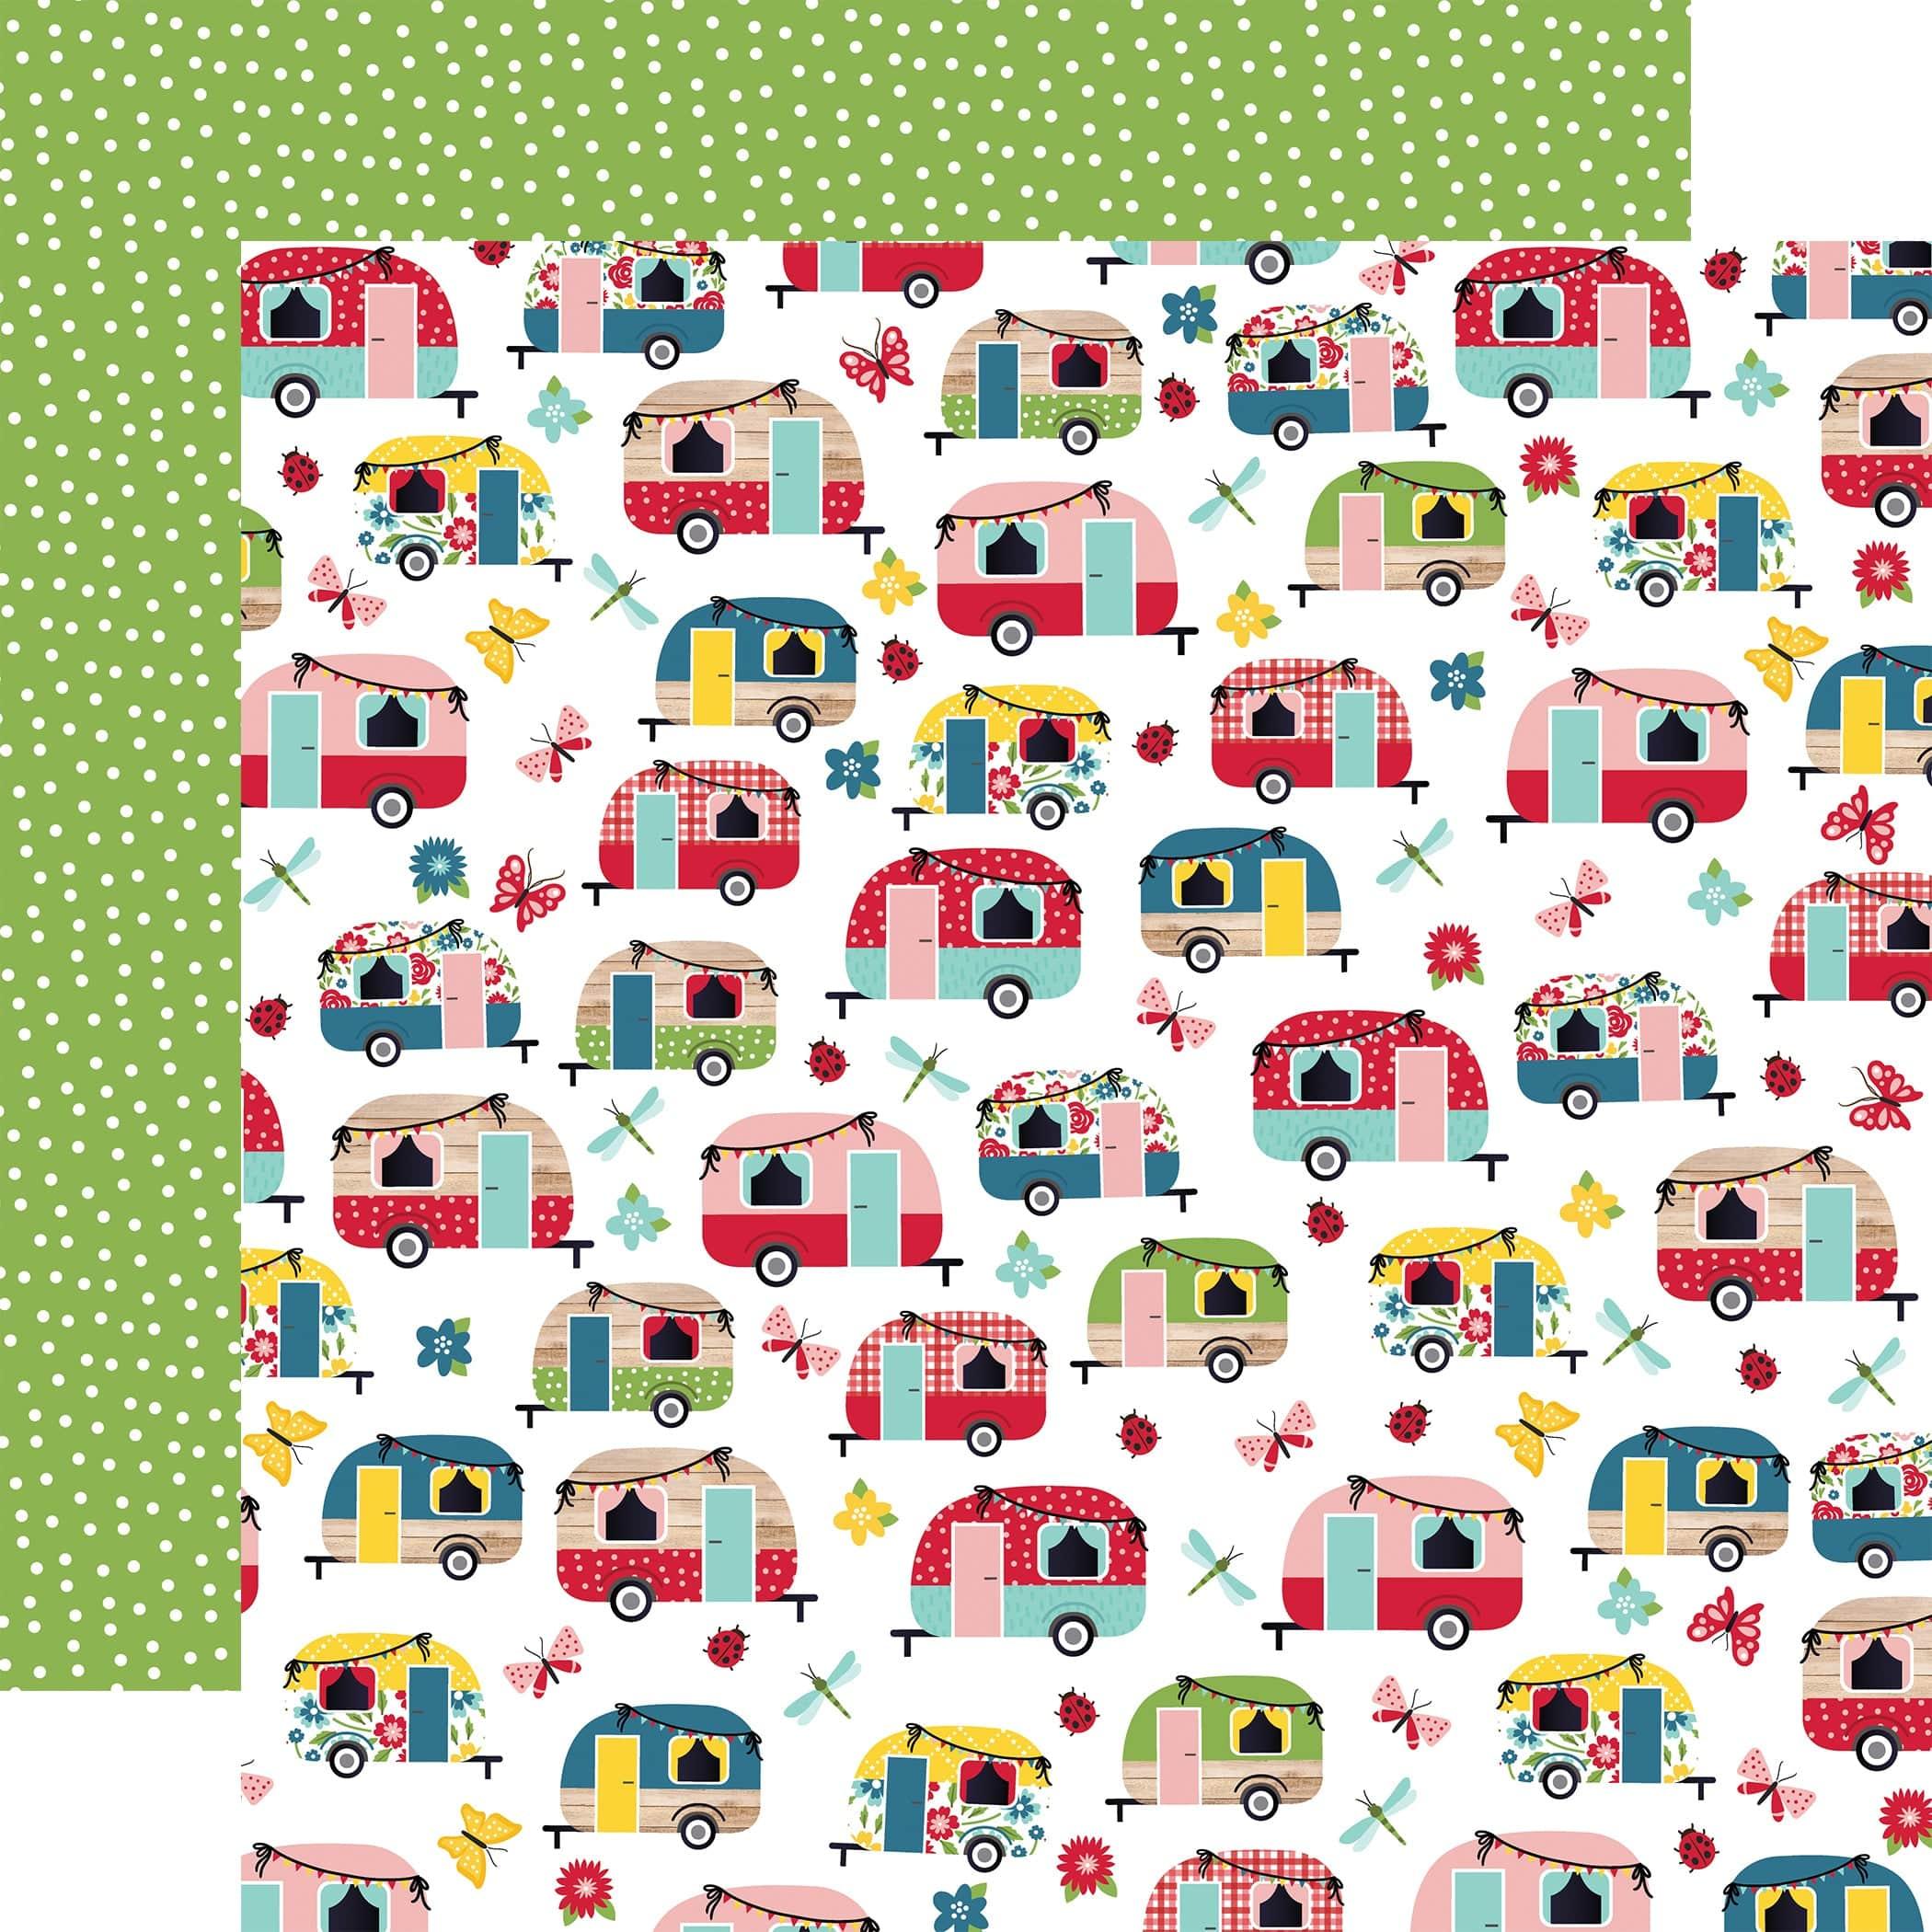 Slice of Summer Collection Happy Campers 12 x 12 Double-Sided Scrapbook Paper by Echo Park Paper - Scrapbook Supply Companies